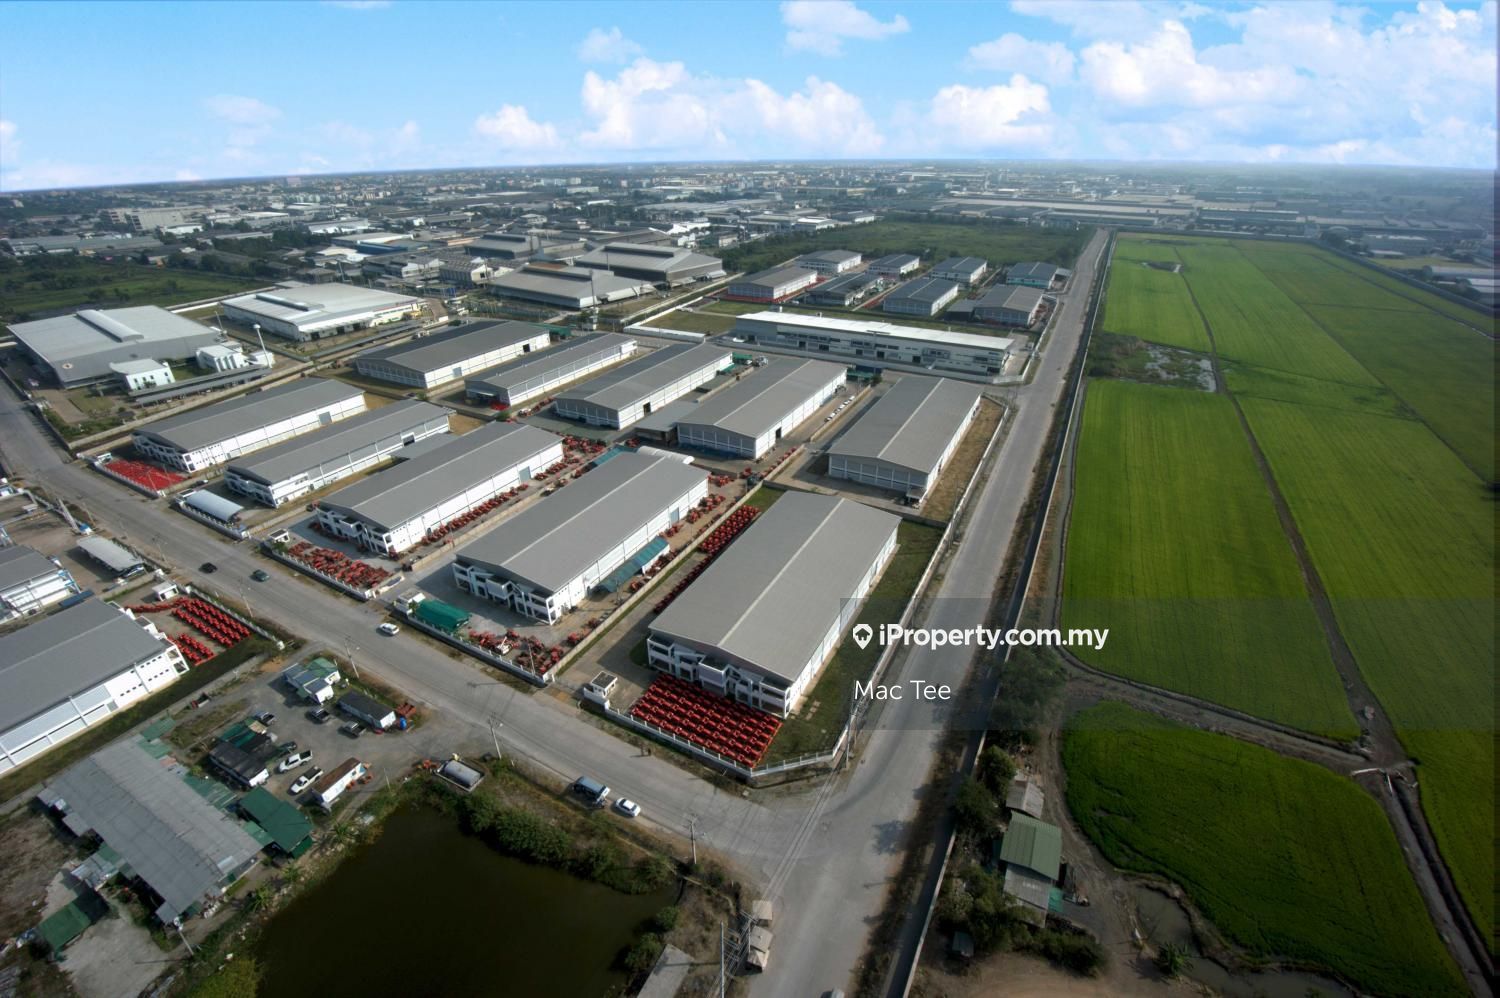 Shah Alam Freehold Industrial Land, Shah Alam